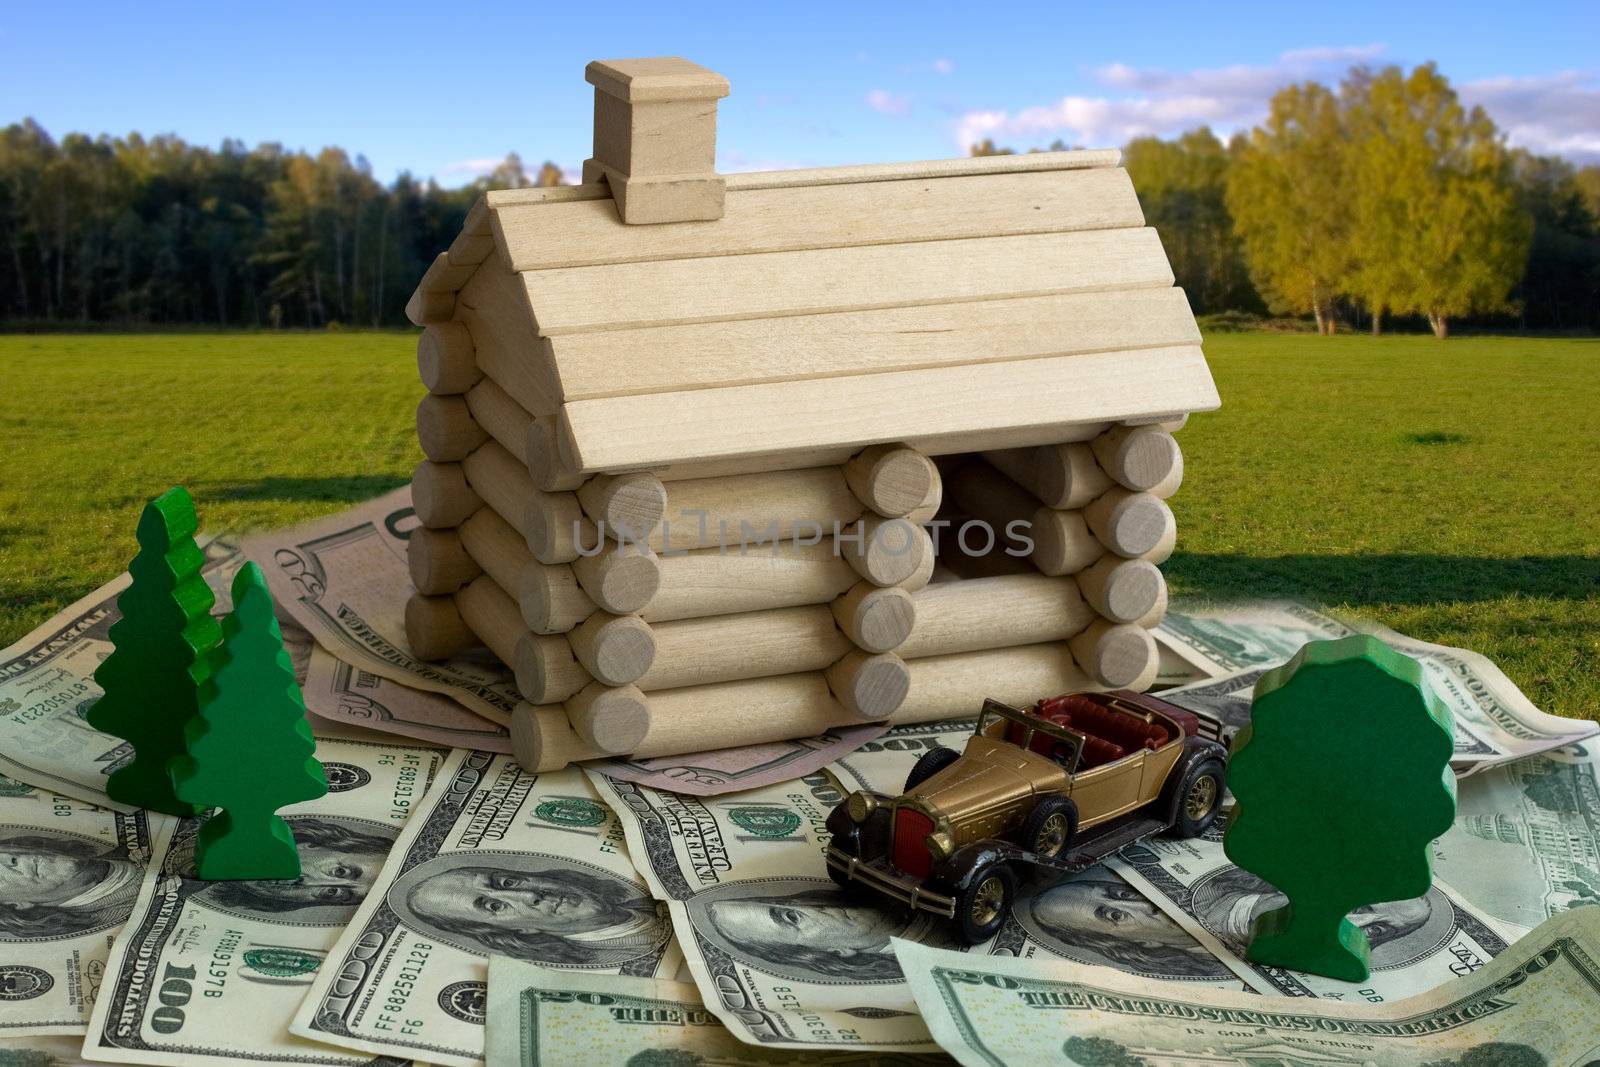 Log building model and money by ints